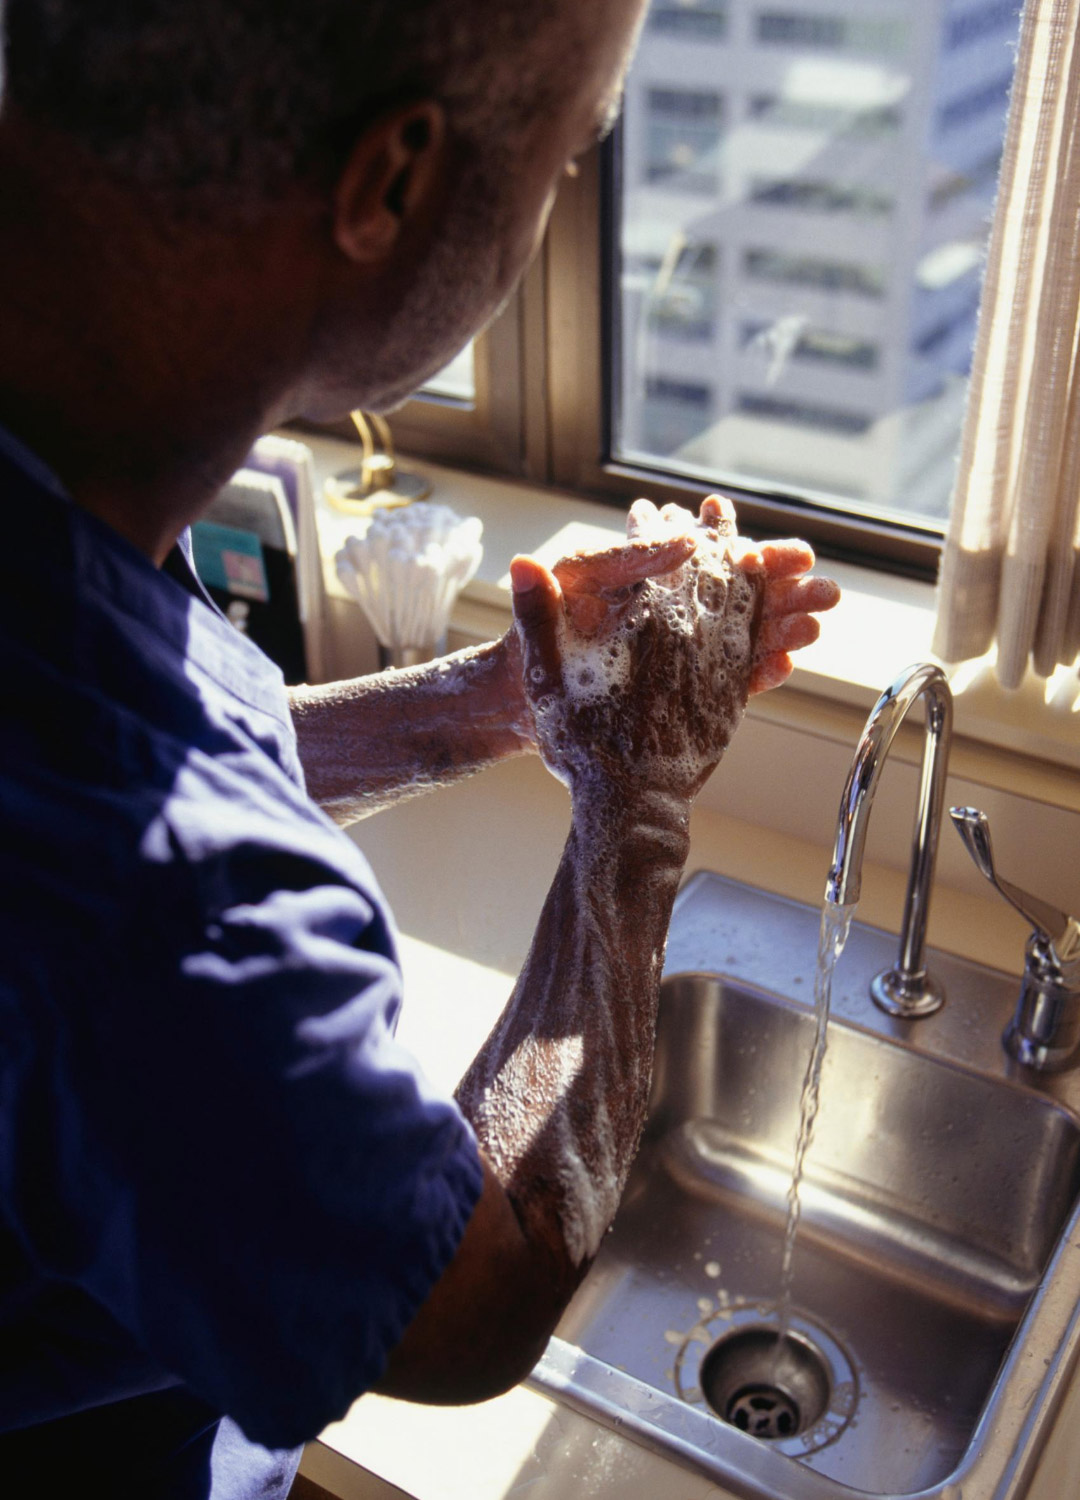 A person washes their hands in sink